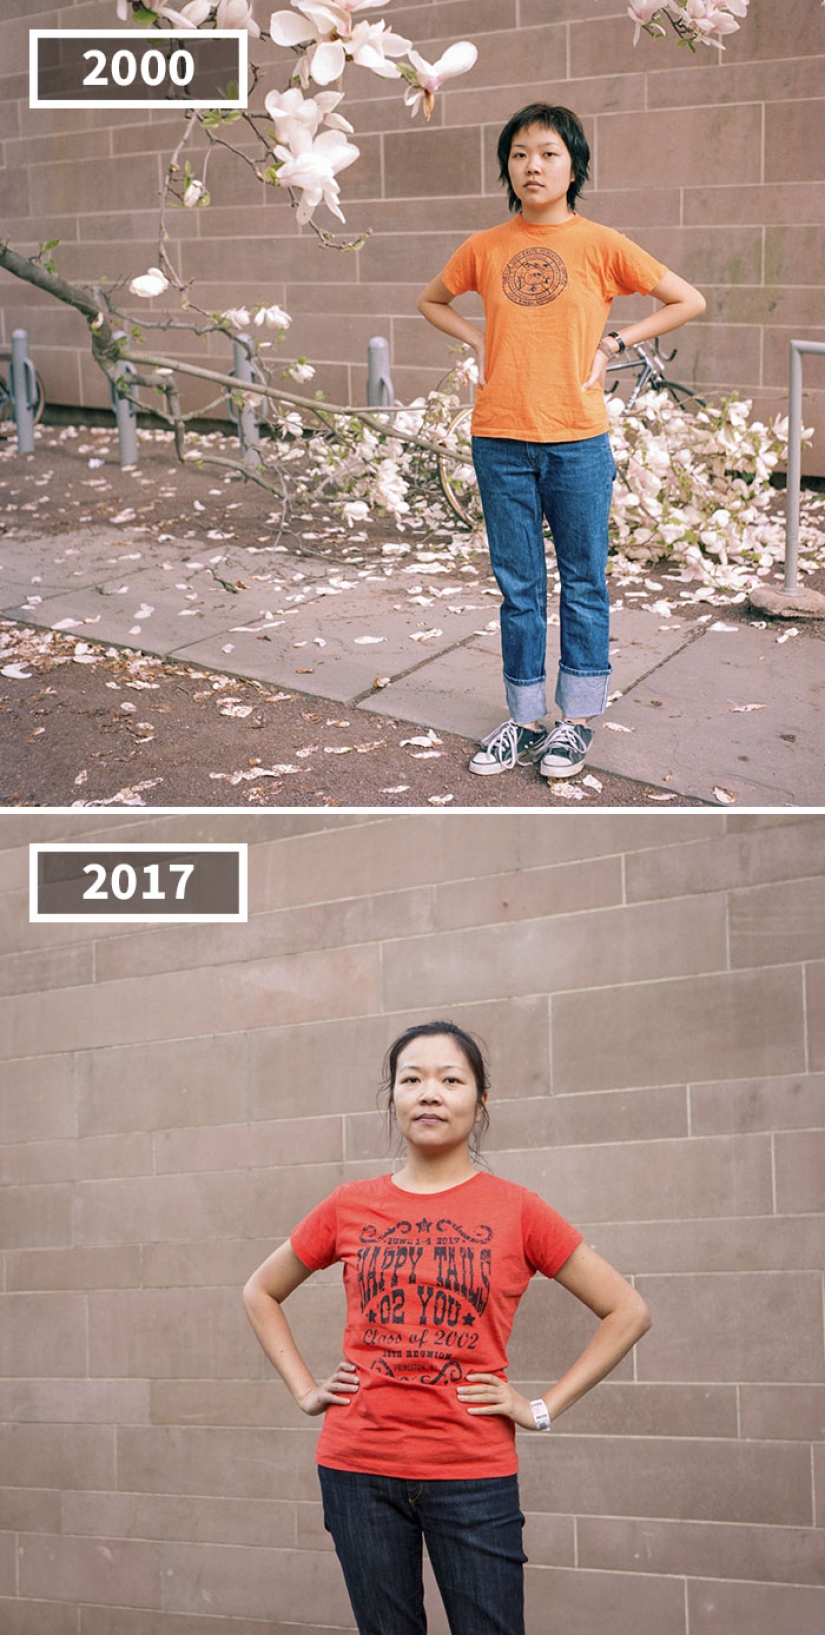 17 years later: the photographer uses the example of friends to show how people grow up in different ways